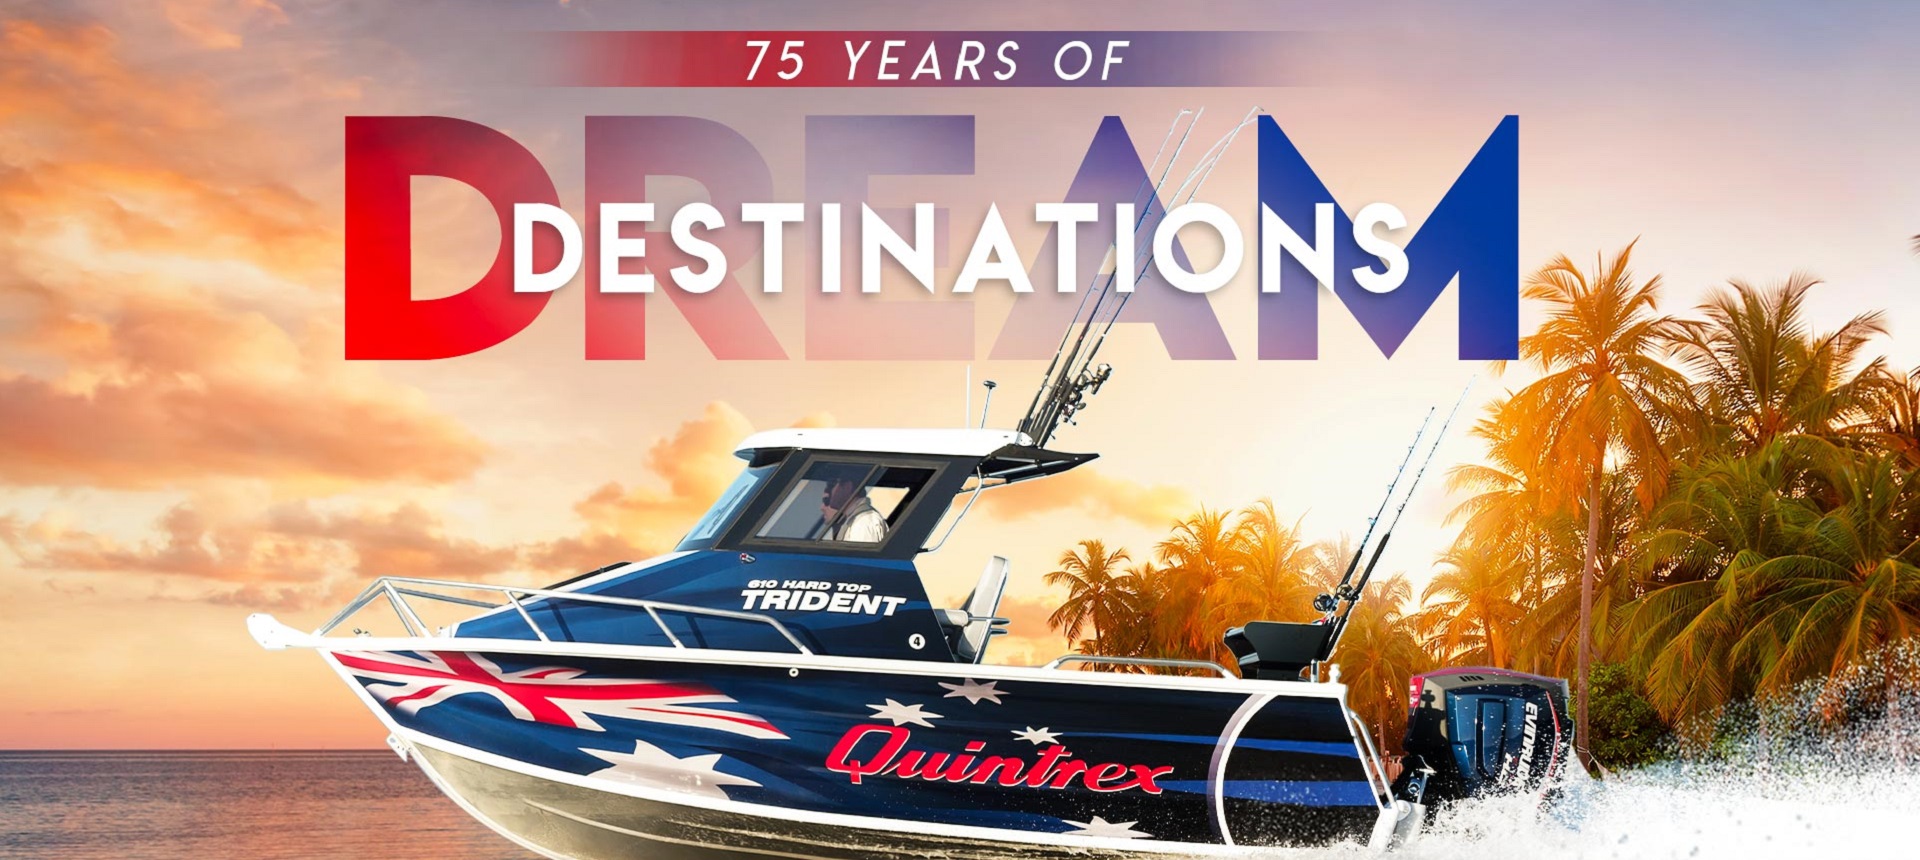 75 Years of Dream Destinations with Quintrex